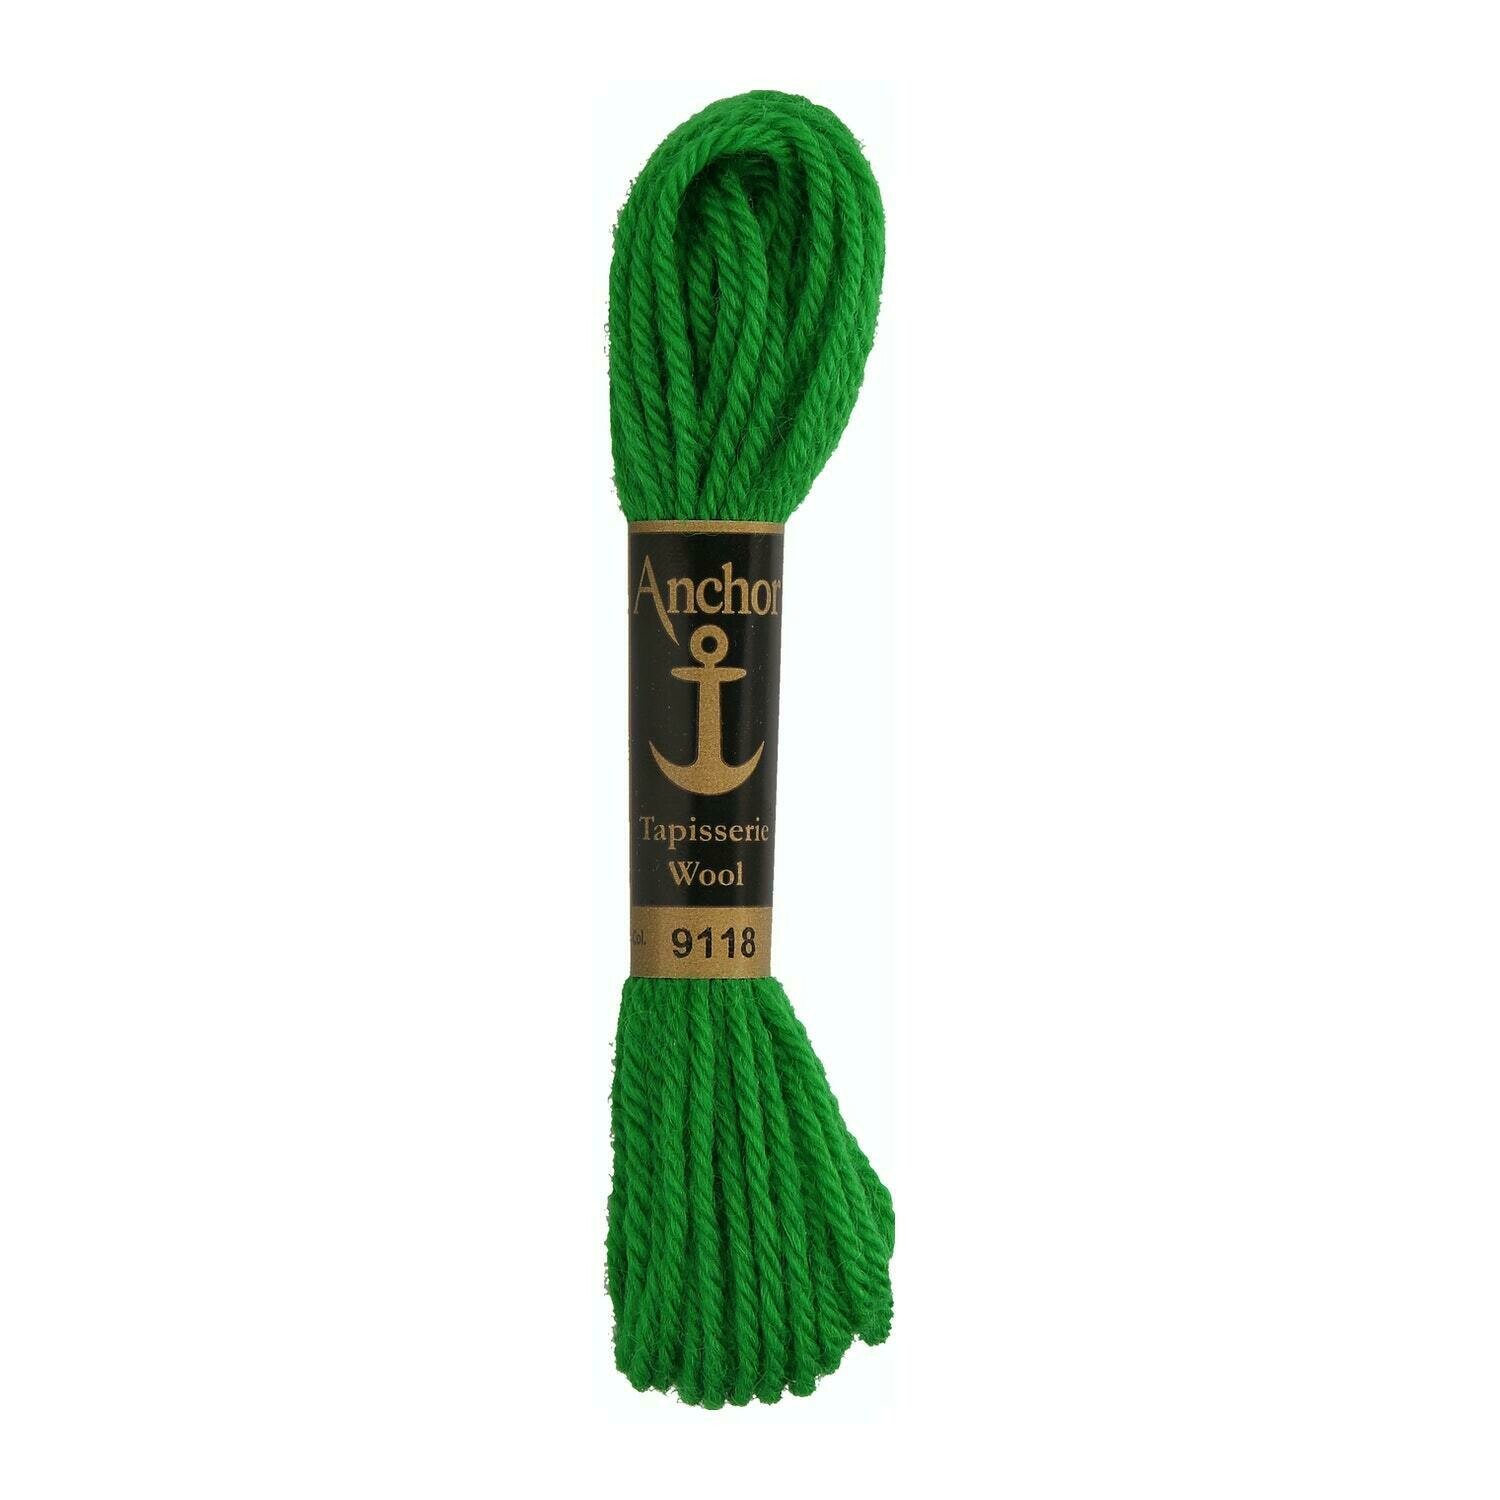 Anchor Tapisserie Wool #09118